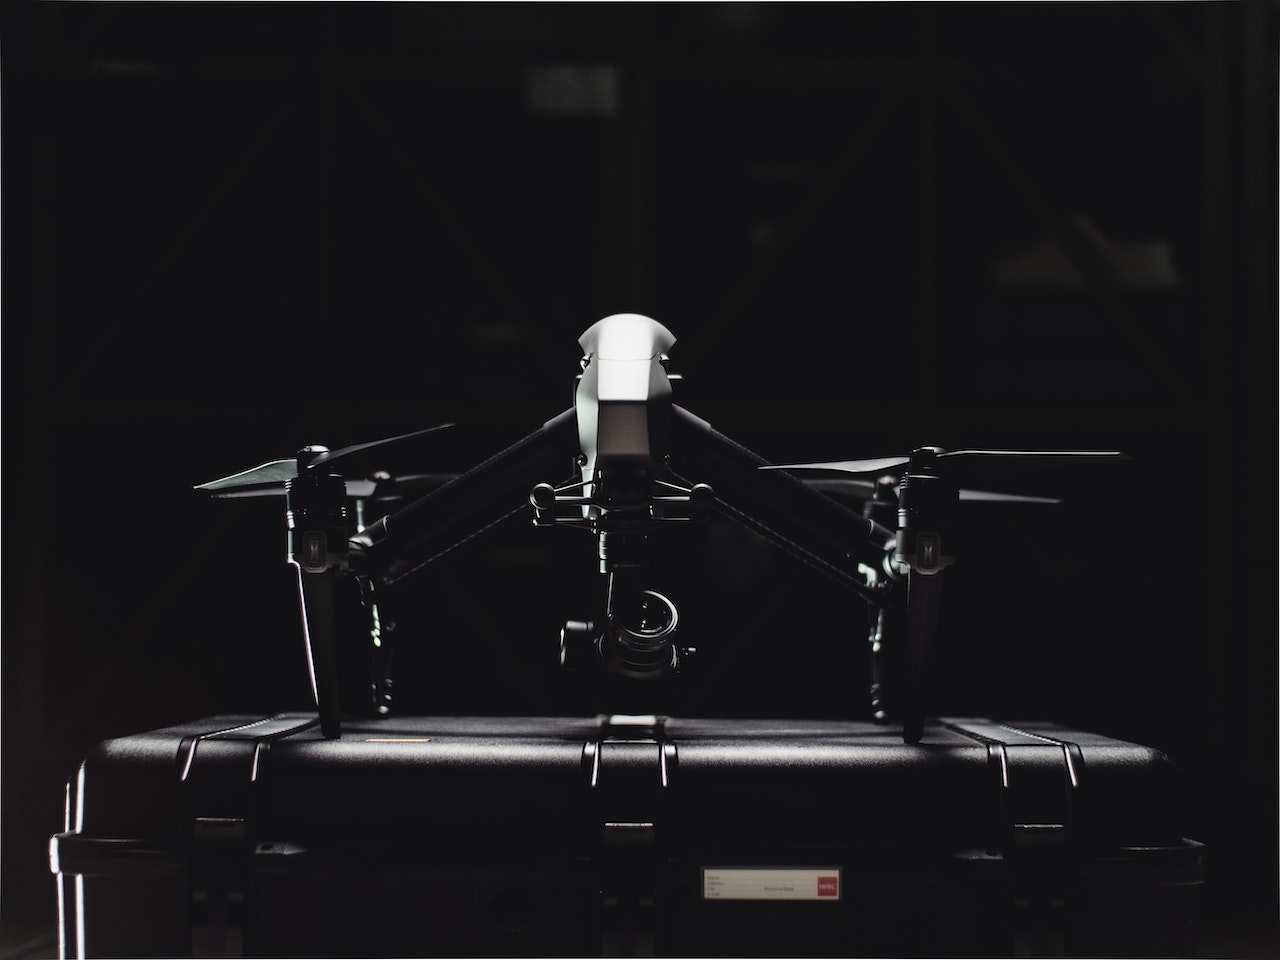 How Do Drones Work? Find Out Here